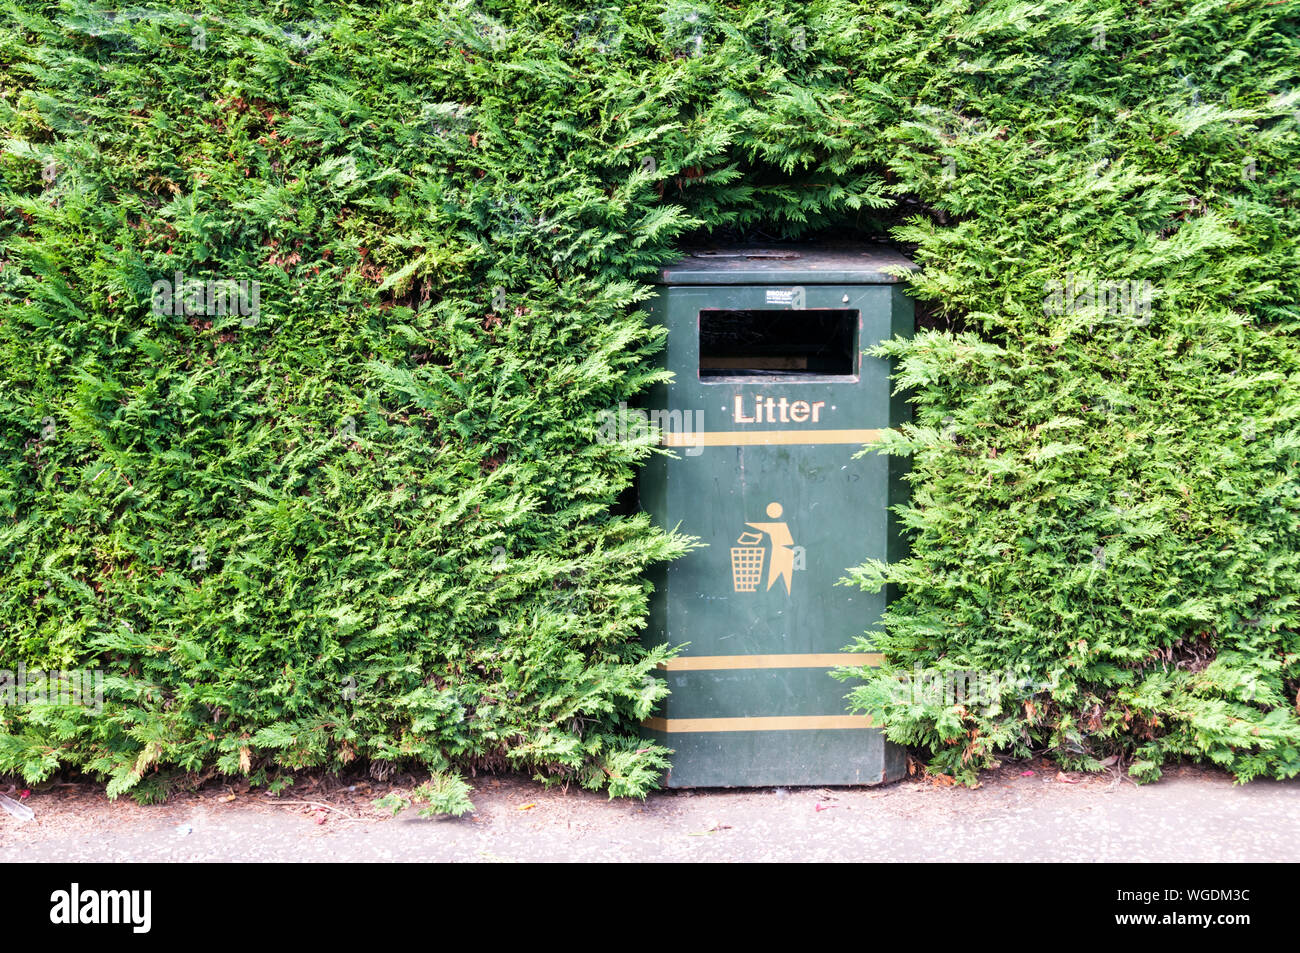 A hedge trimmed around a litter bin. Stock Photo